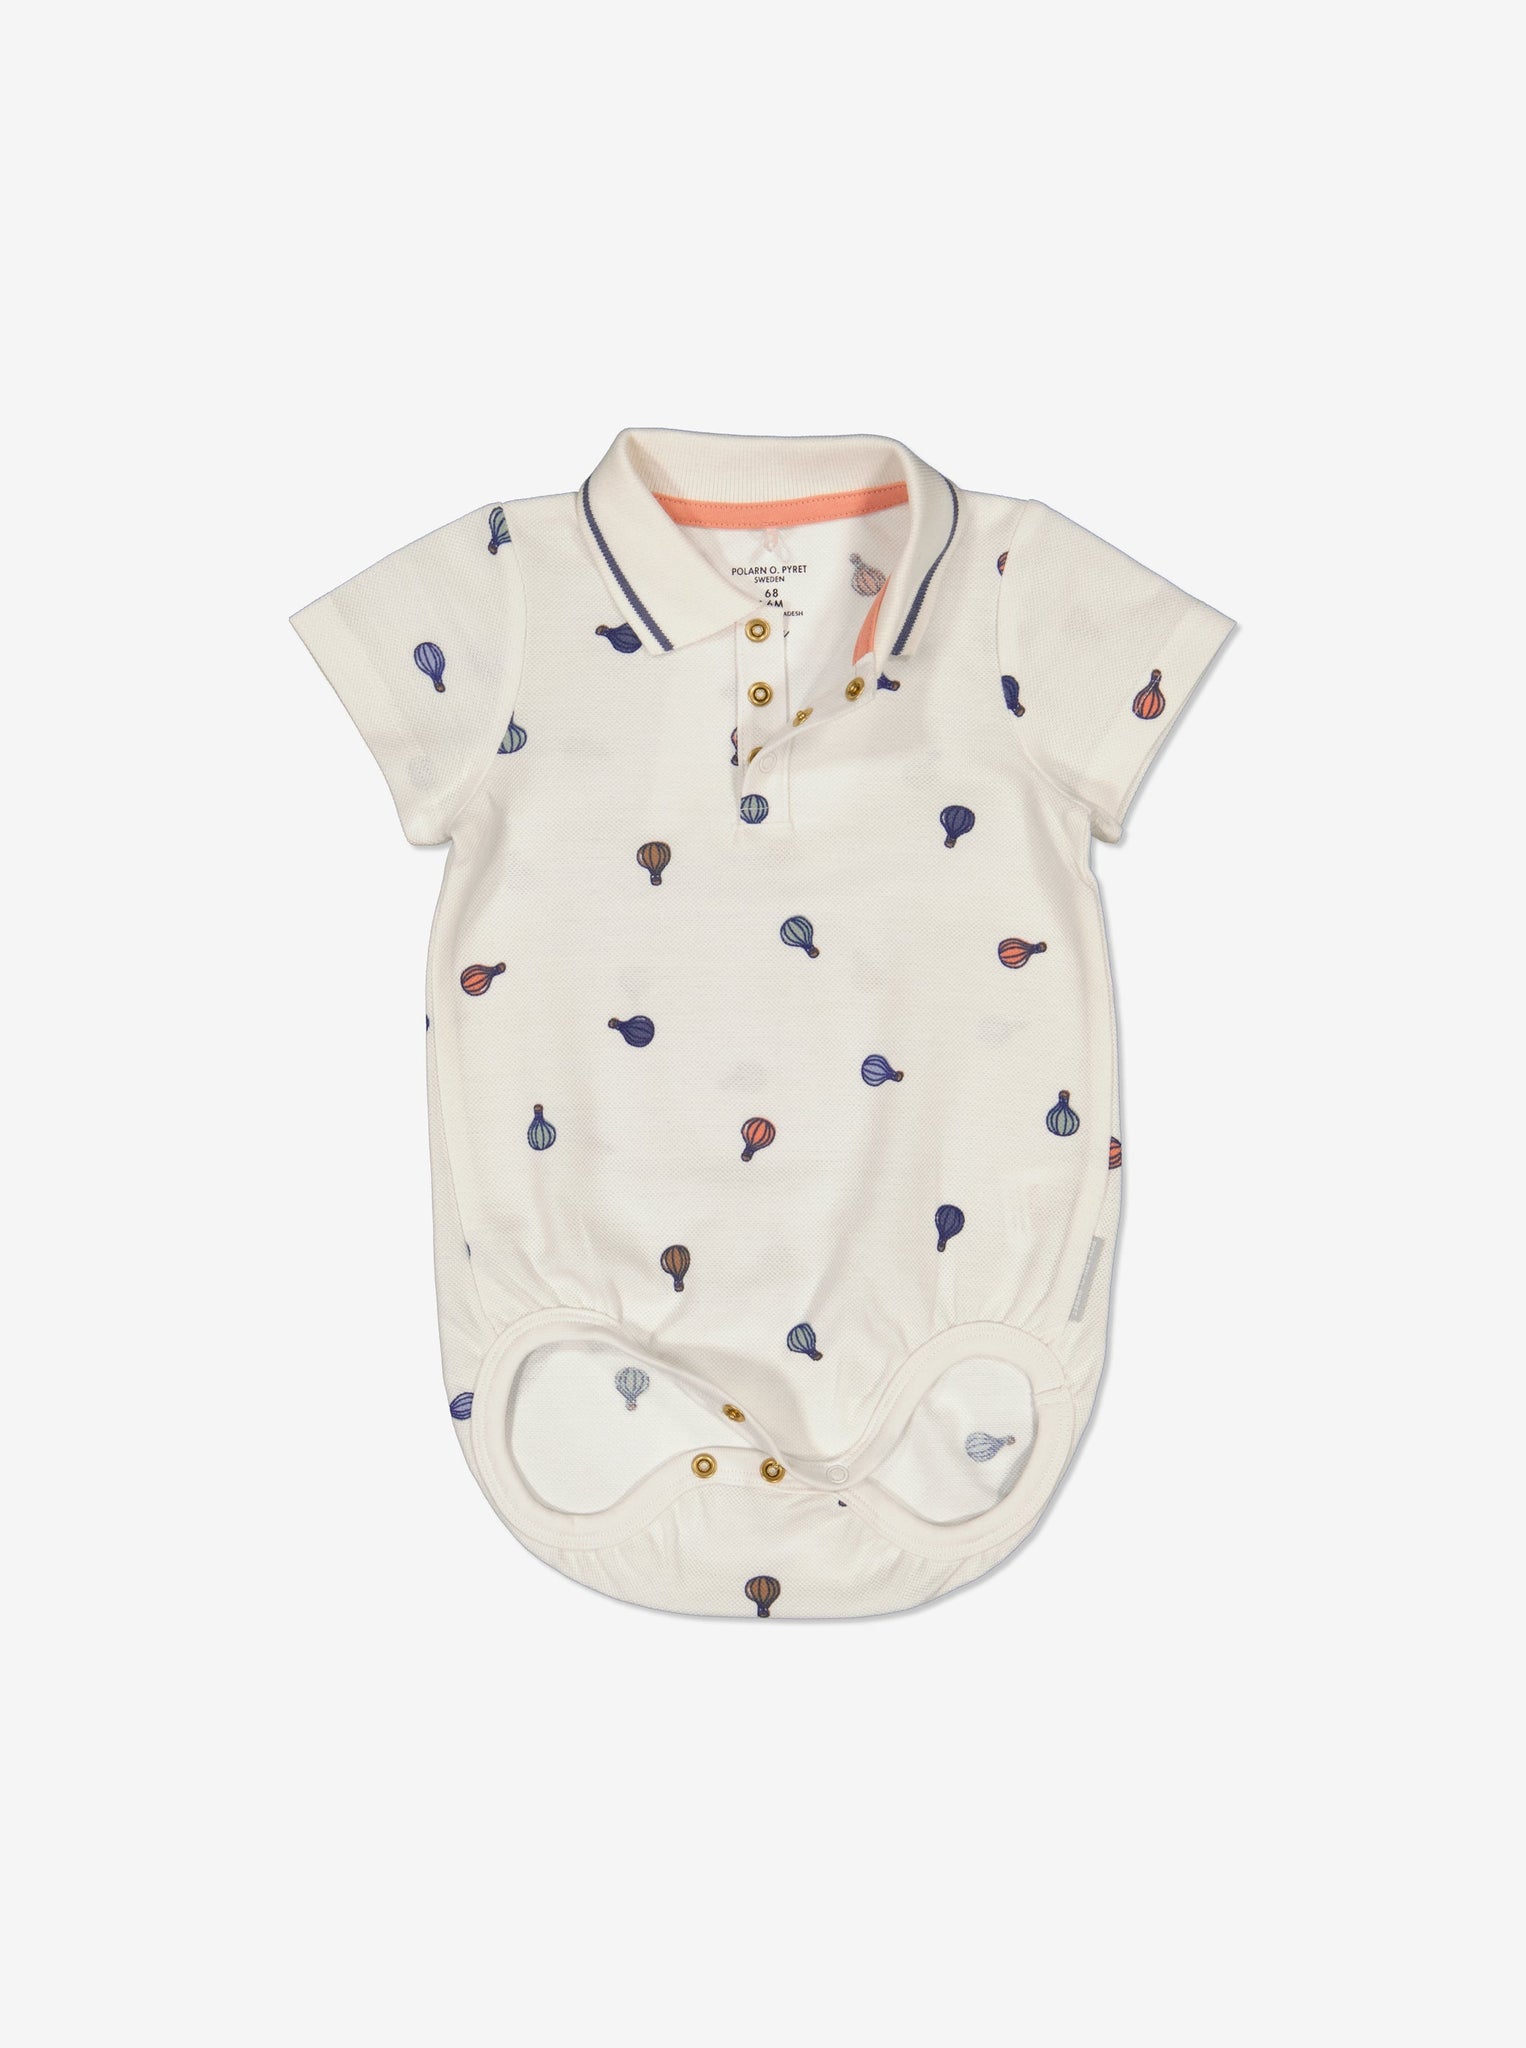 Newborn Baby White Polo Bodysuit from Polarn O. Pyret Kidswear. Made from 100% GOTS Organic Cotton.